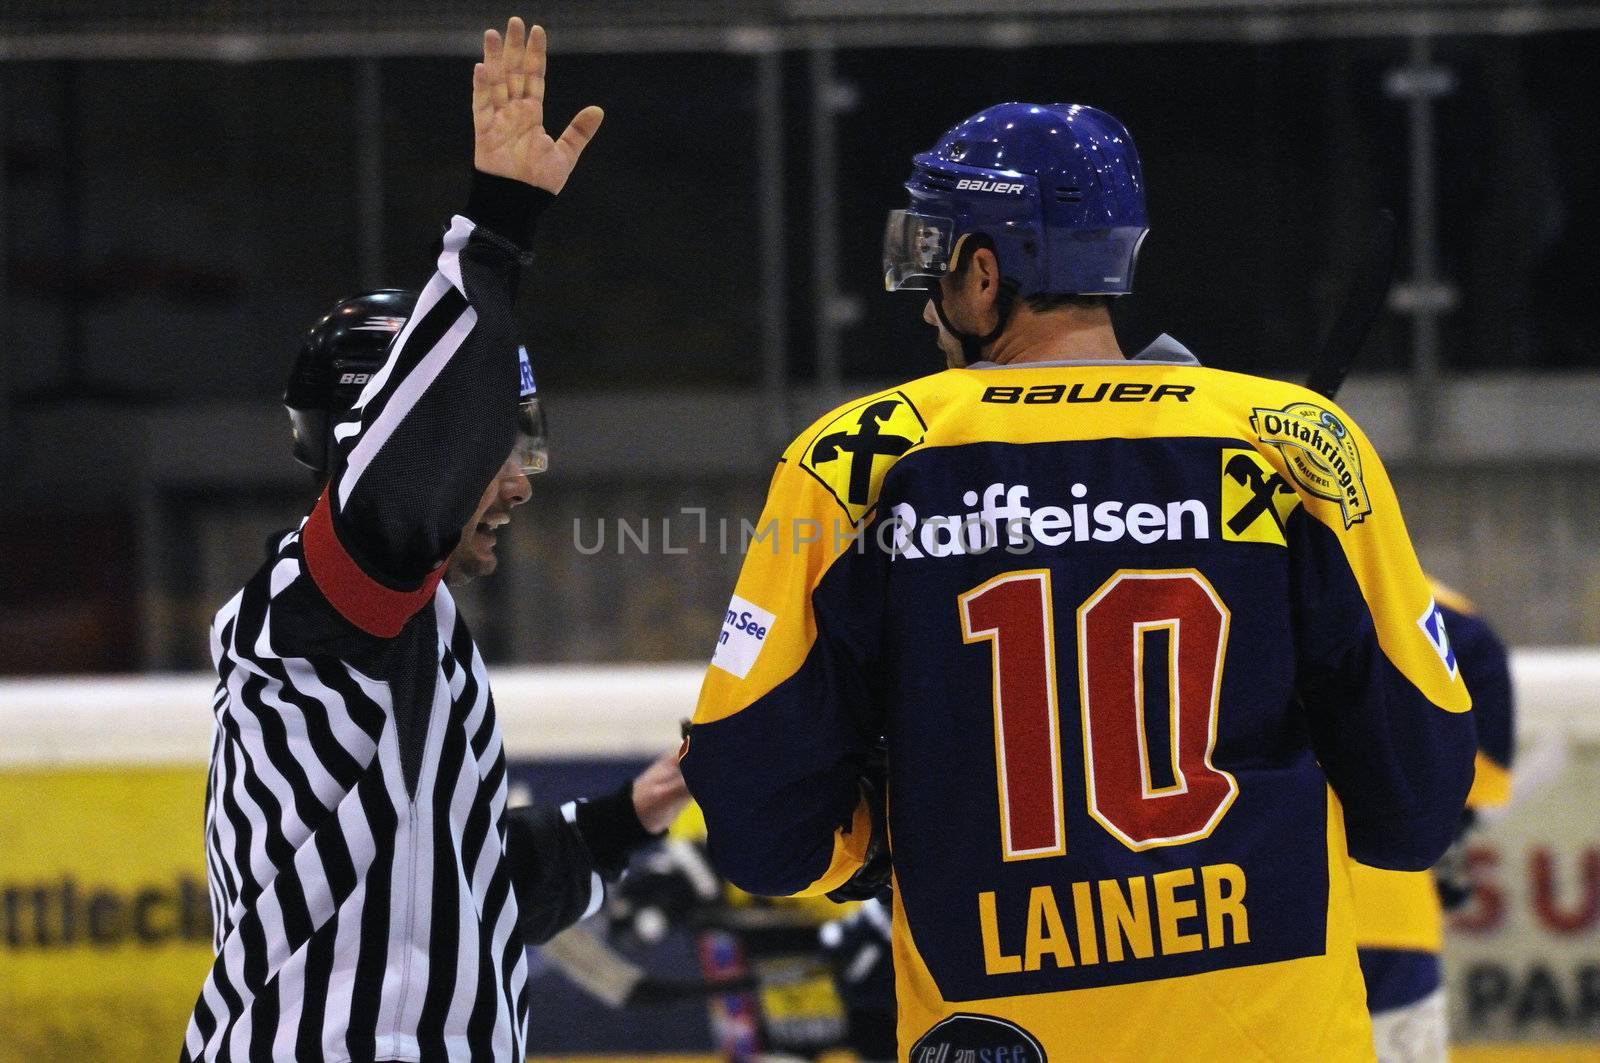 icehockey game action by fahrner